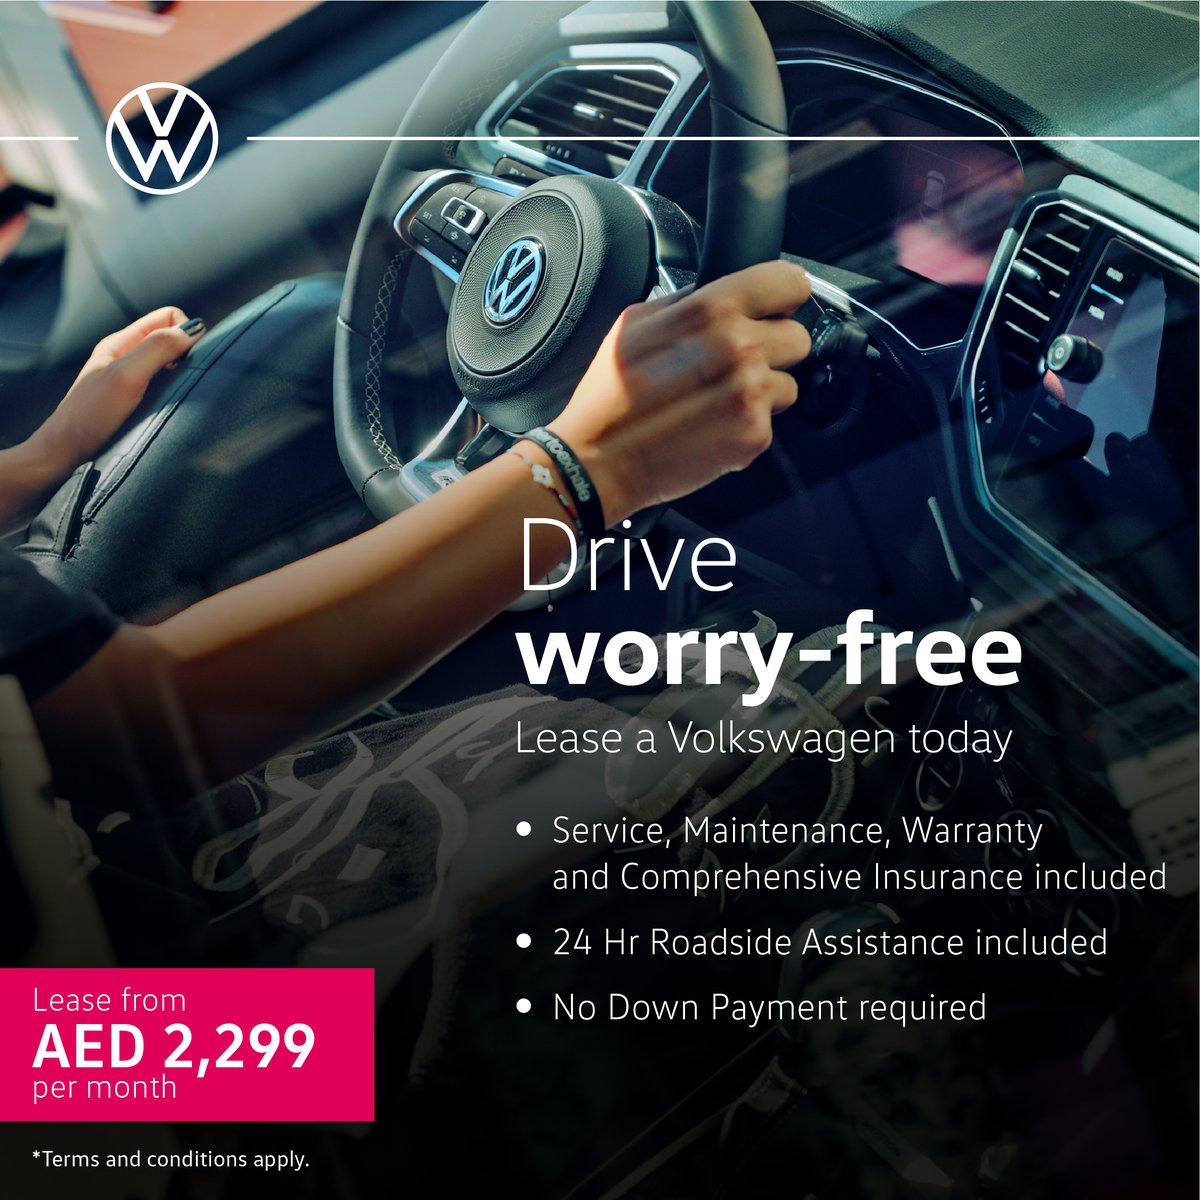 Lease a Volkswagen today from AED 2,299/month. Visit your nearest Al Nabooda Automobiles Volkswagen showroom to know more. Terms and Conditions apply.* #VWDubai #AlNaboodaAutomobiles #carleasing #carservice #offer